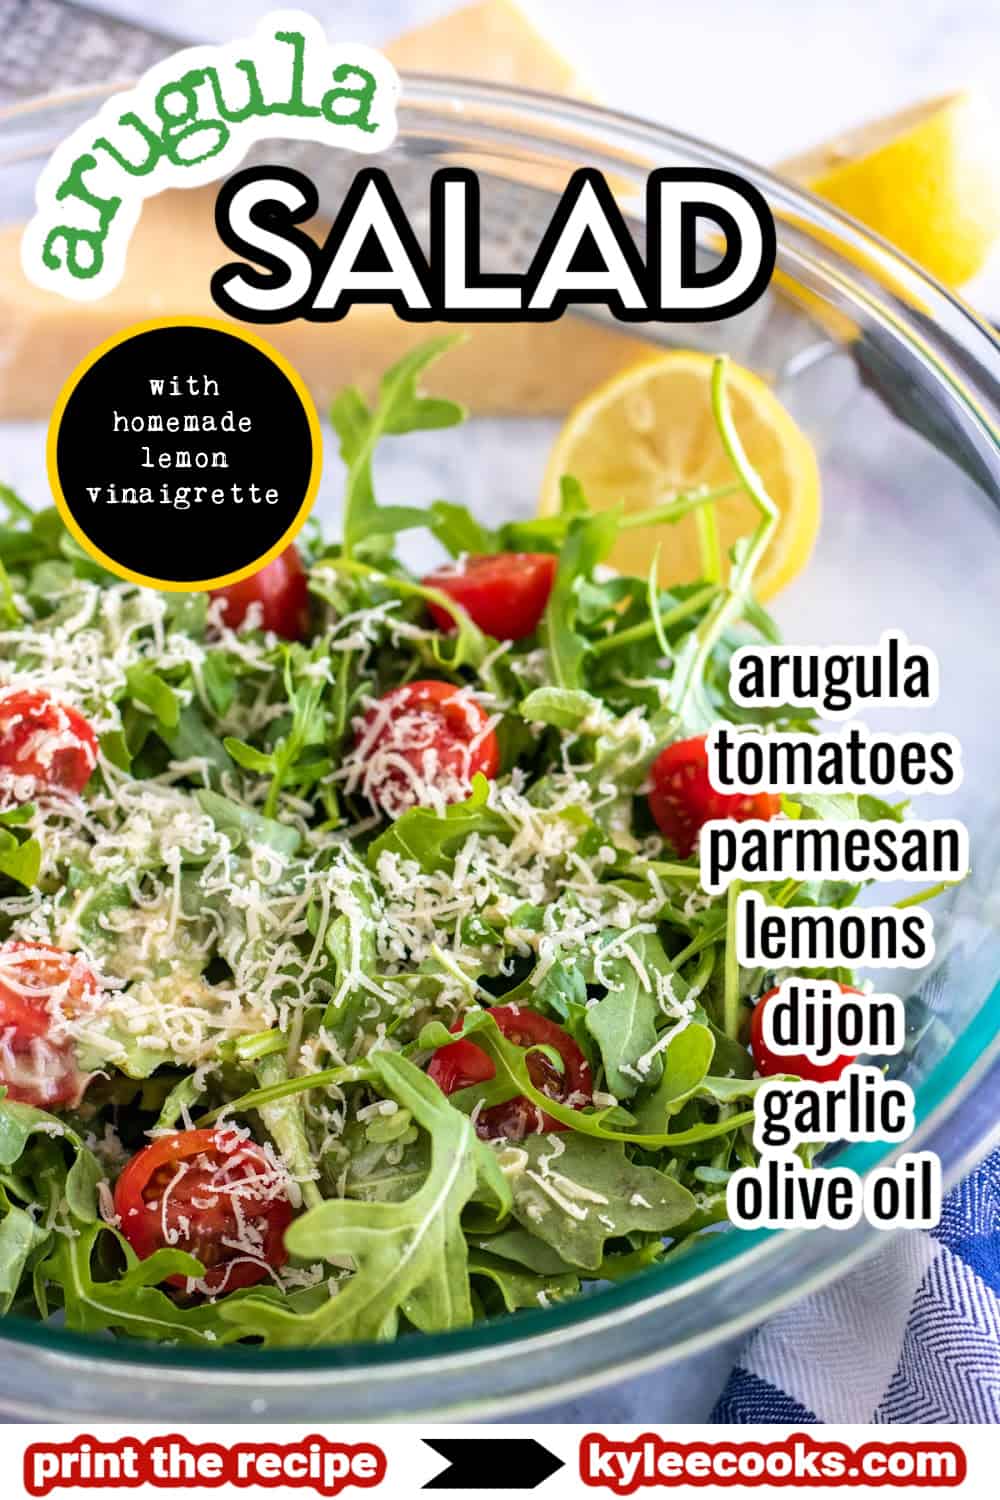 arugula salad in a clear glass bowl with text overlay.